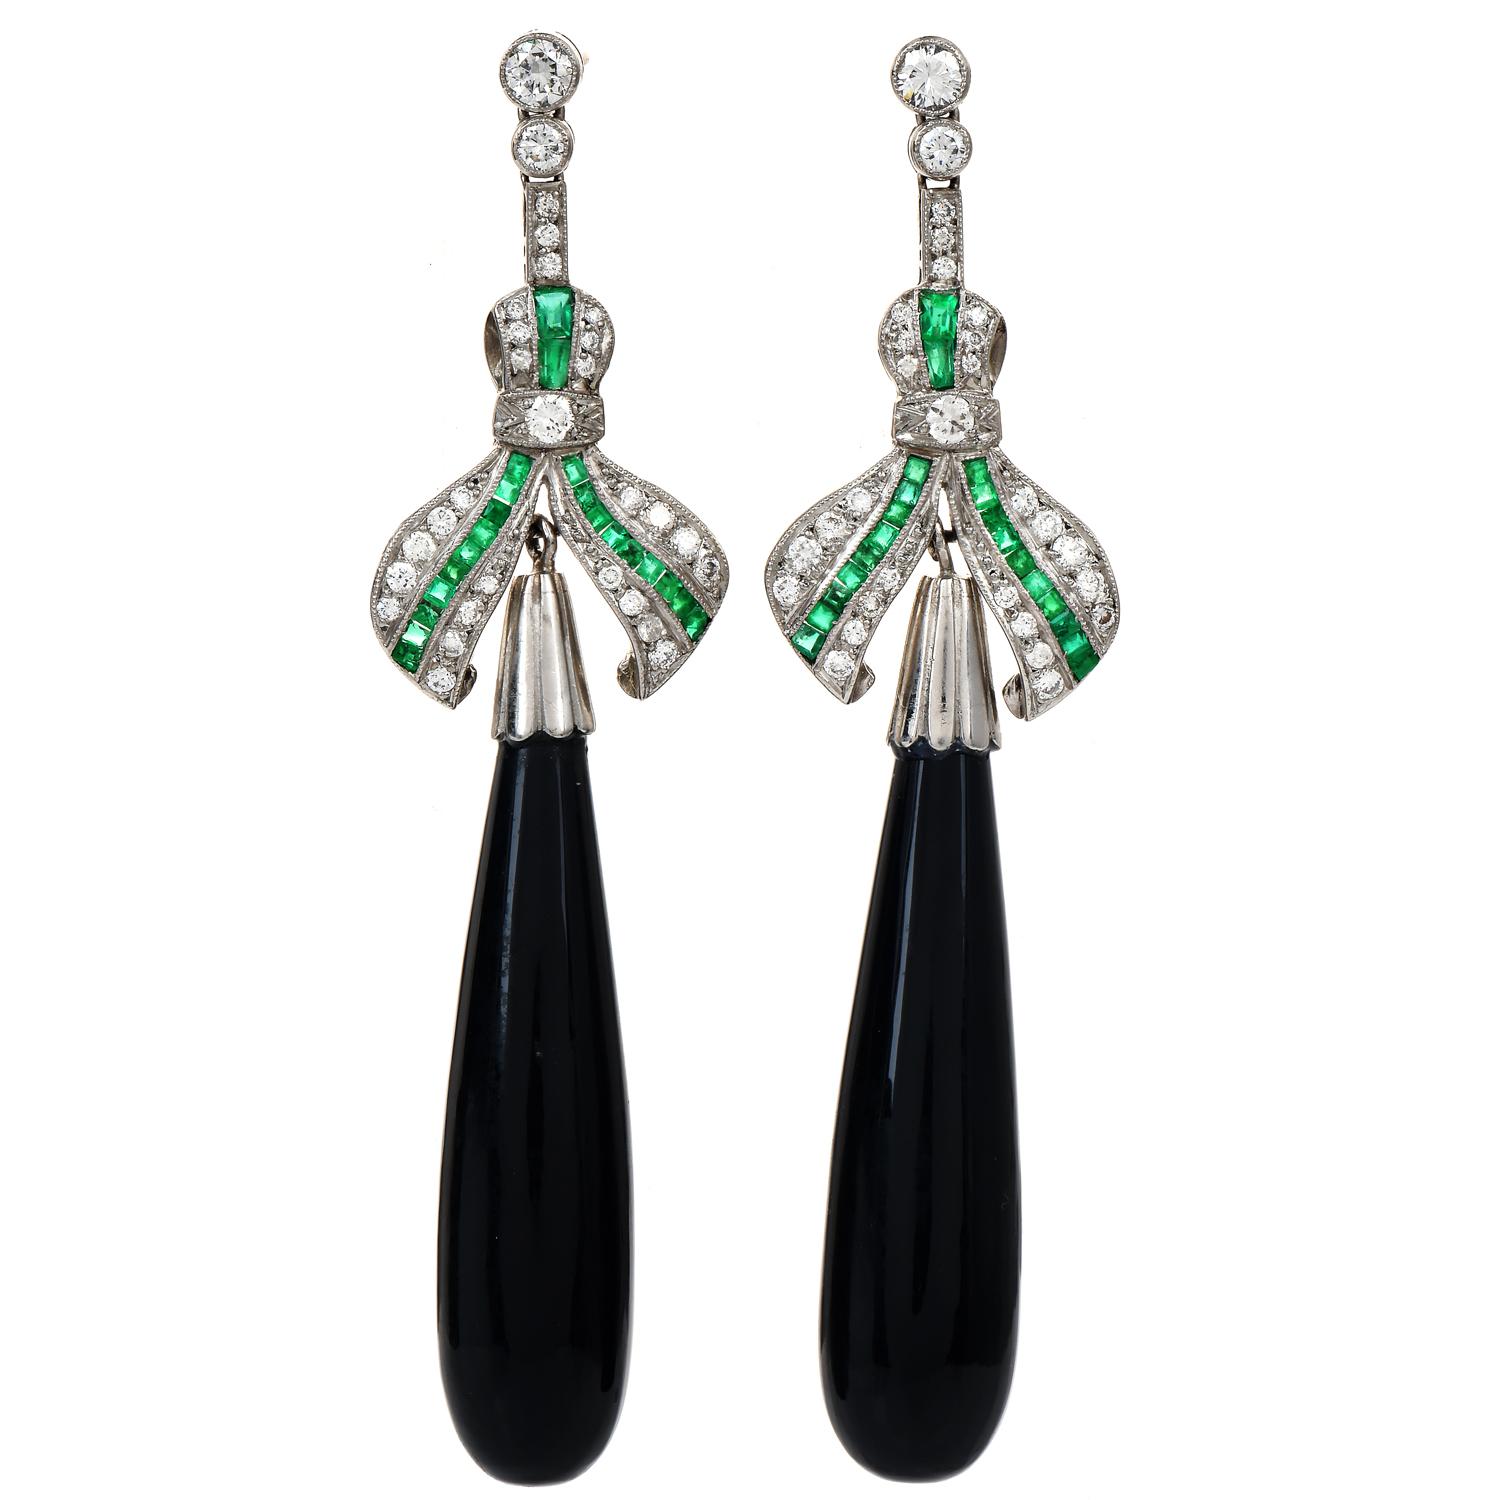 Enjoy these exquisite, elegant, and unique ribbon-inspired dangle drop earrings!

These dramatic earrings are wonderfully styled for a special event.

Finely crafted in Platinum, they have 2 genuine black onyx, cabochon pear shaped measuring 35 mm x